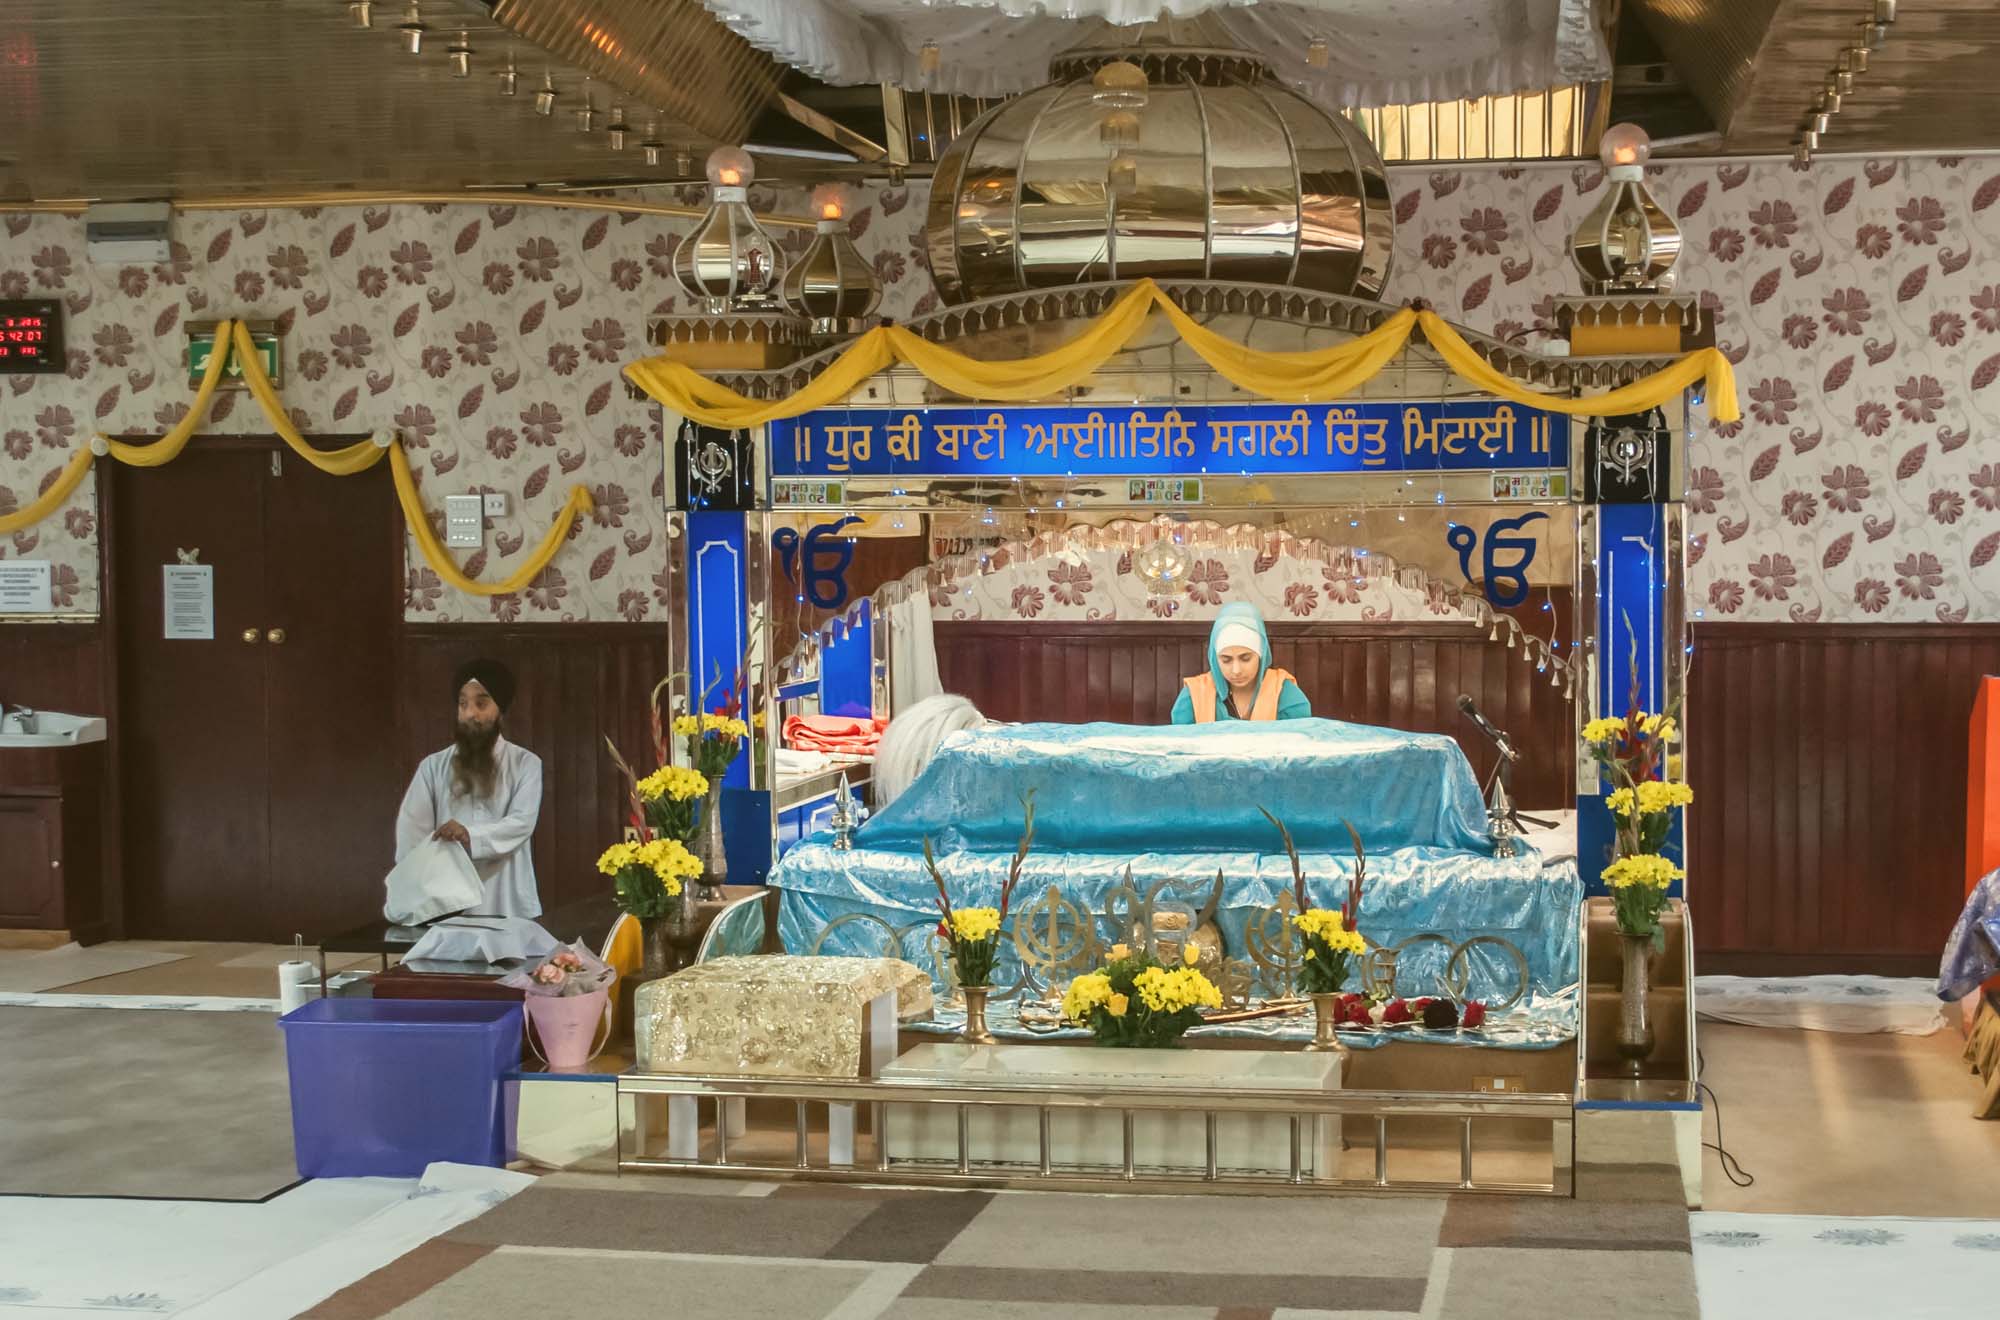 Inside the Guru Nanak Gurdwara, Leicester. Places of worship play a central role in many of the communities in the city -